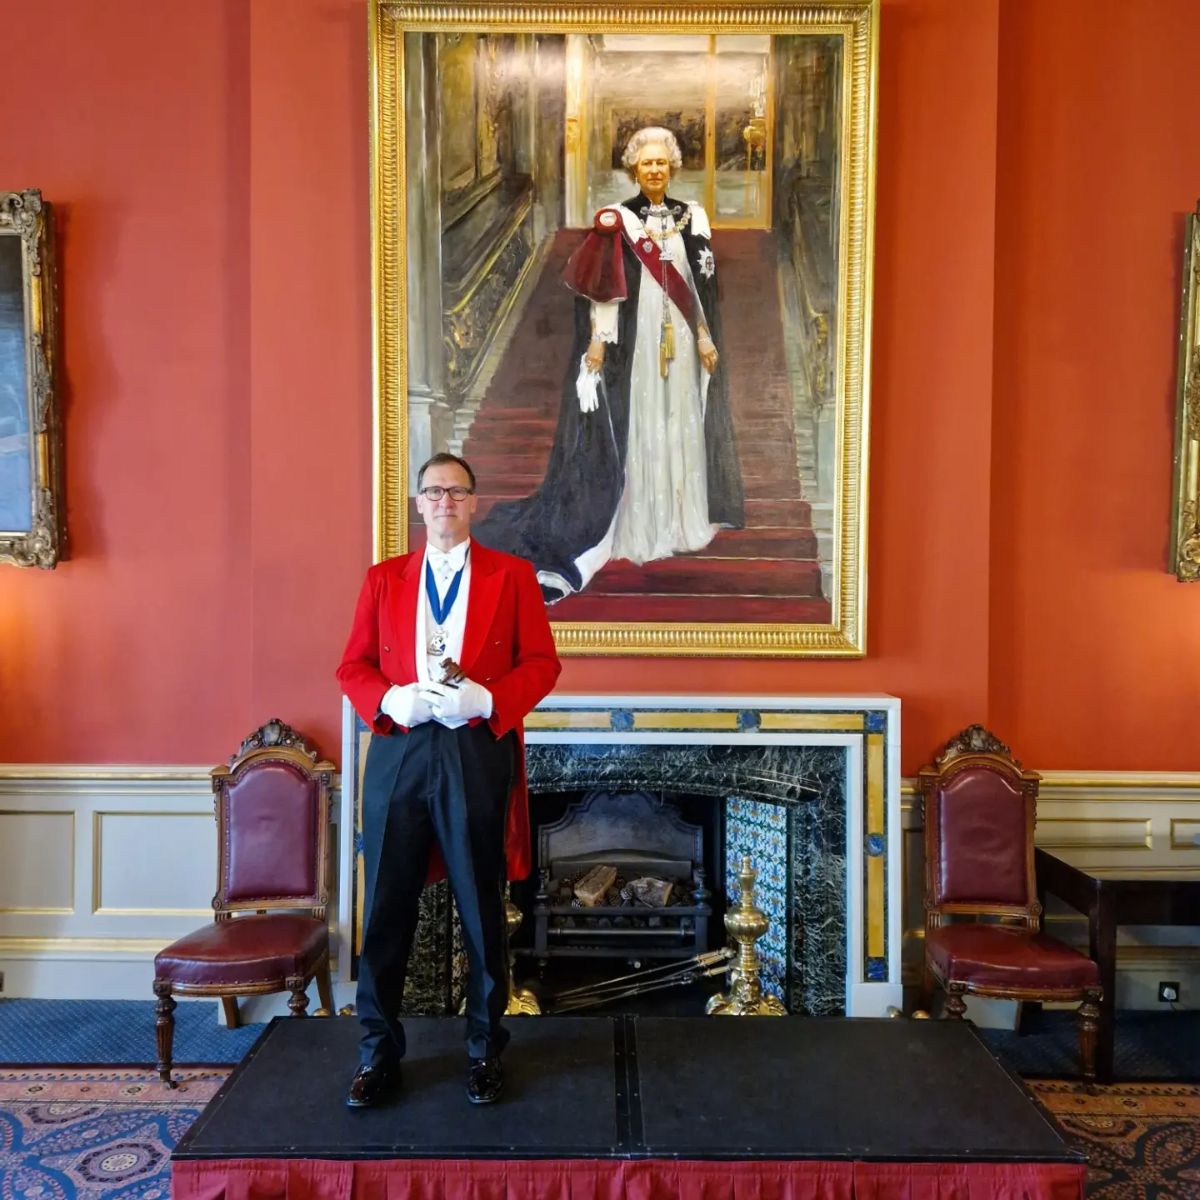 The Man in the Red Coat - Toastmaster James Hasler-Image-29